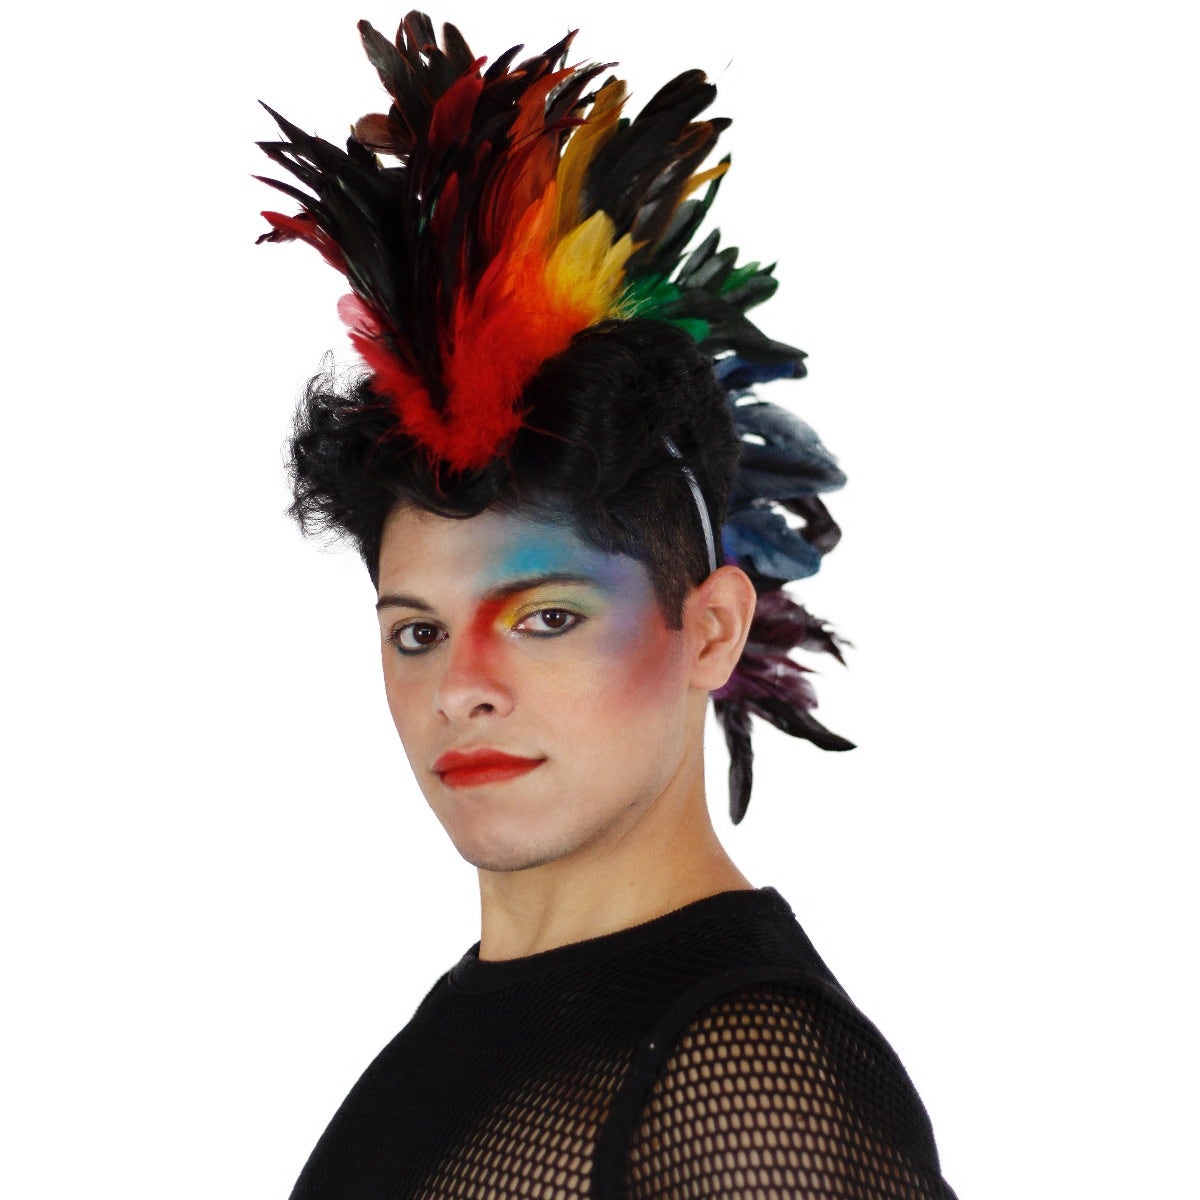 Rainbow Feather Mohawk with Black Tips